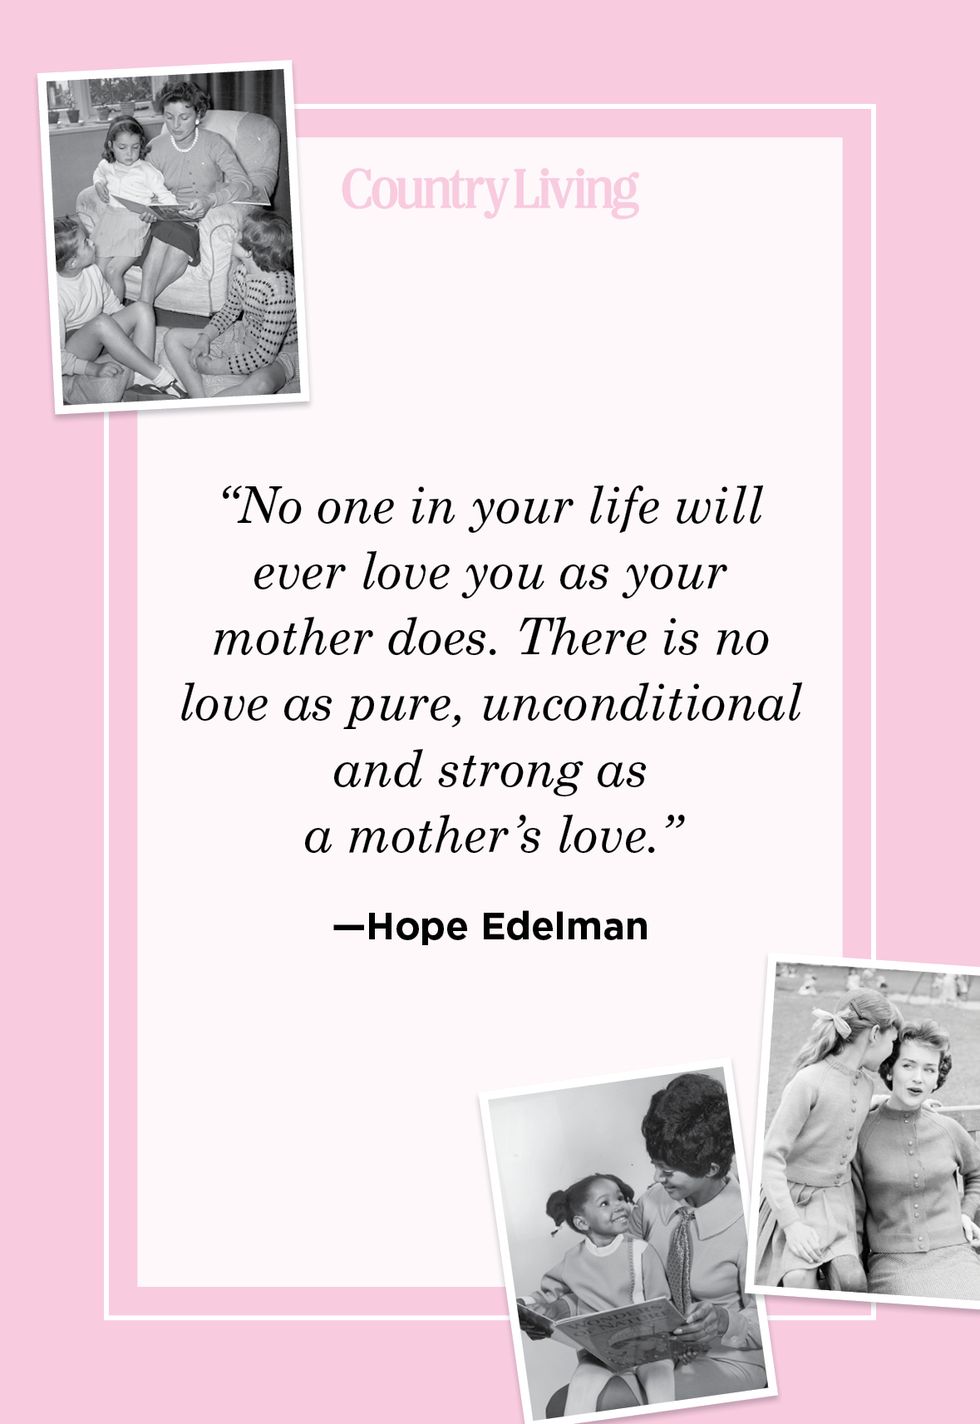 https://hips.hearstapps.com/hmg-prod/images/mothers-day-quotes-6-hope-edelman-6413ebfbc8a26.jpg?crop=1xw:1xh;center,top&resize=980:*